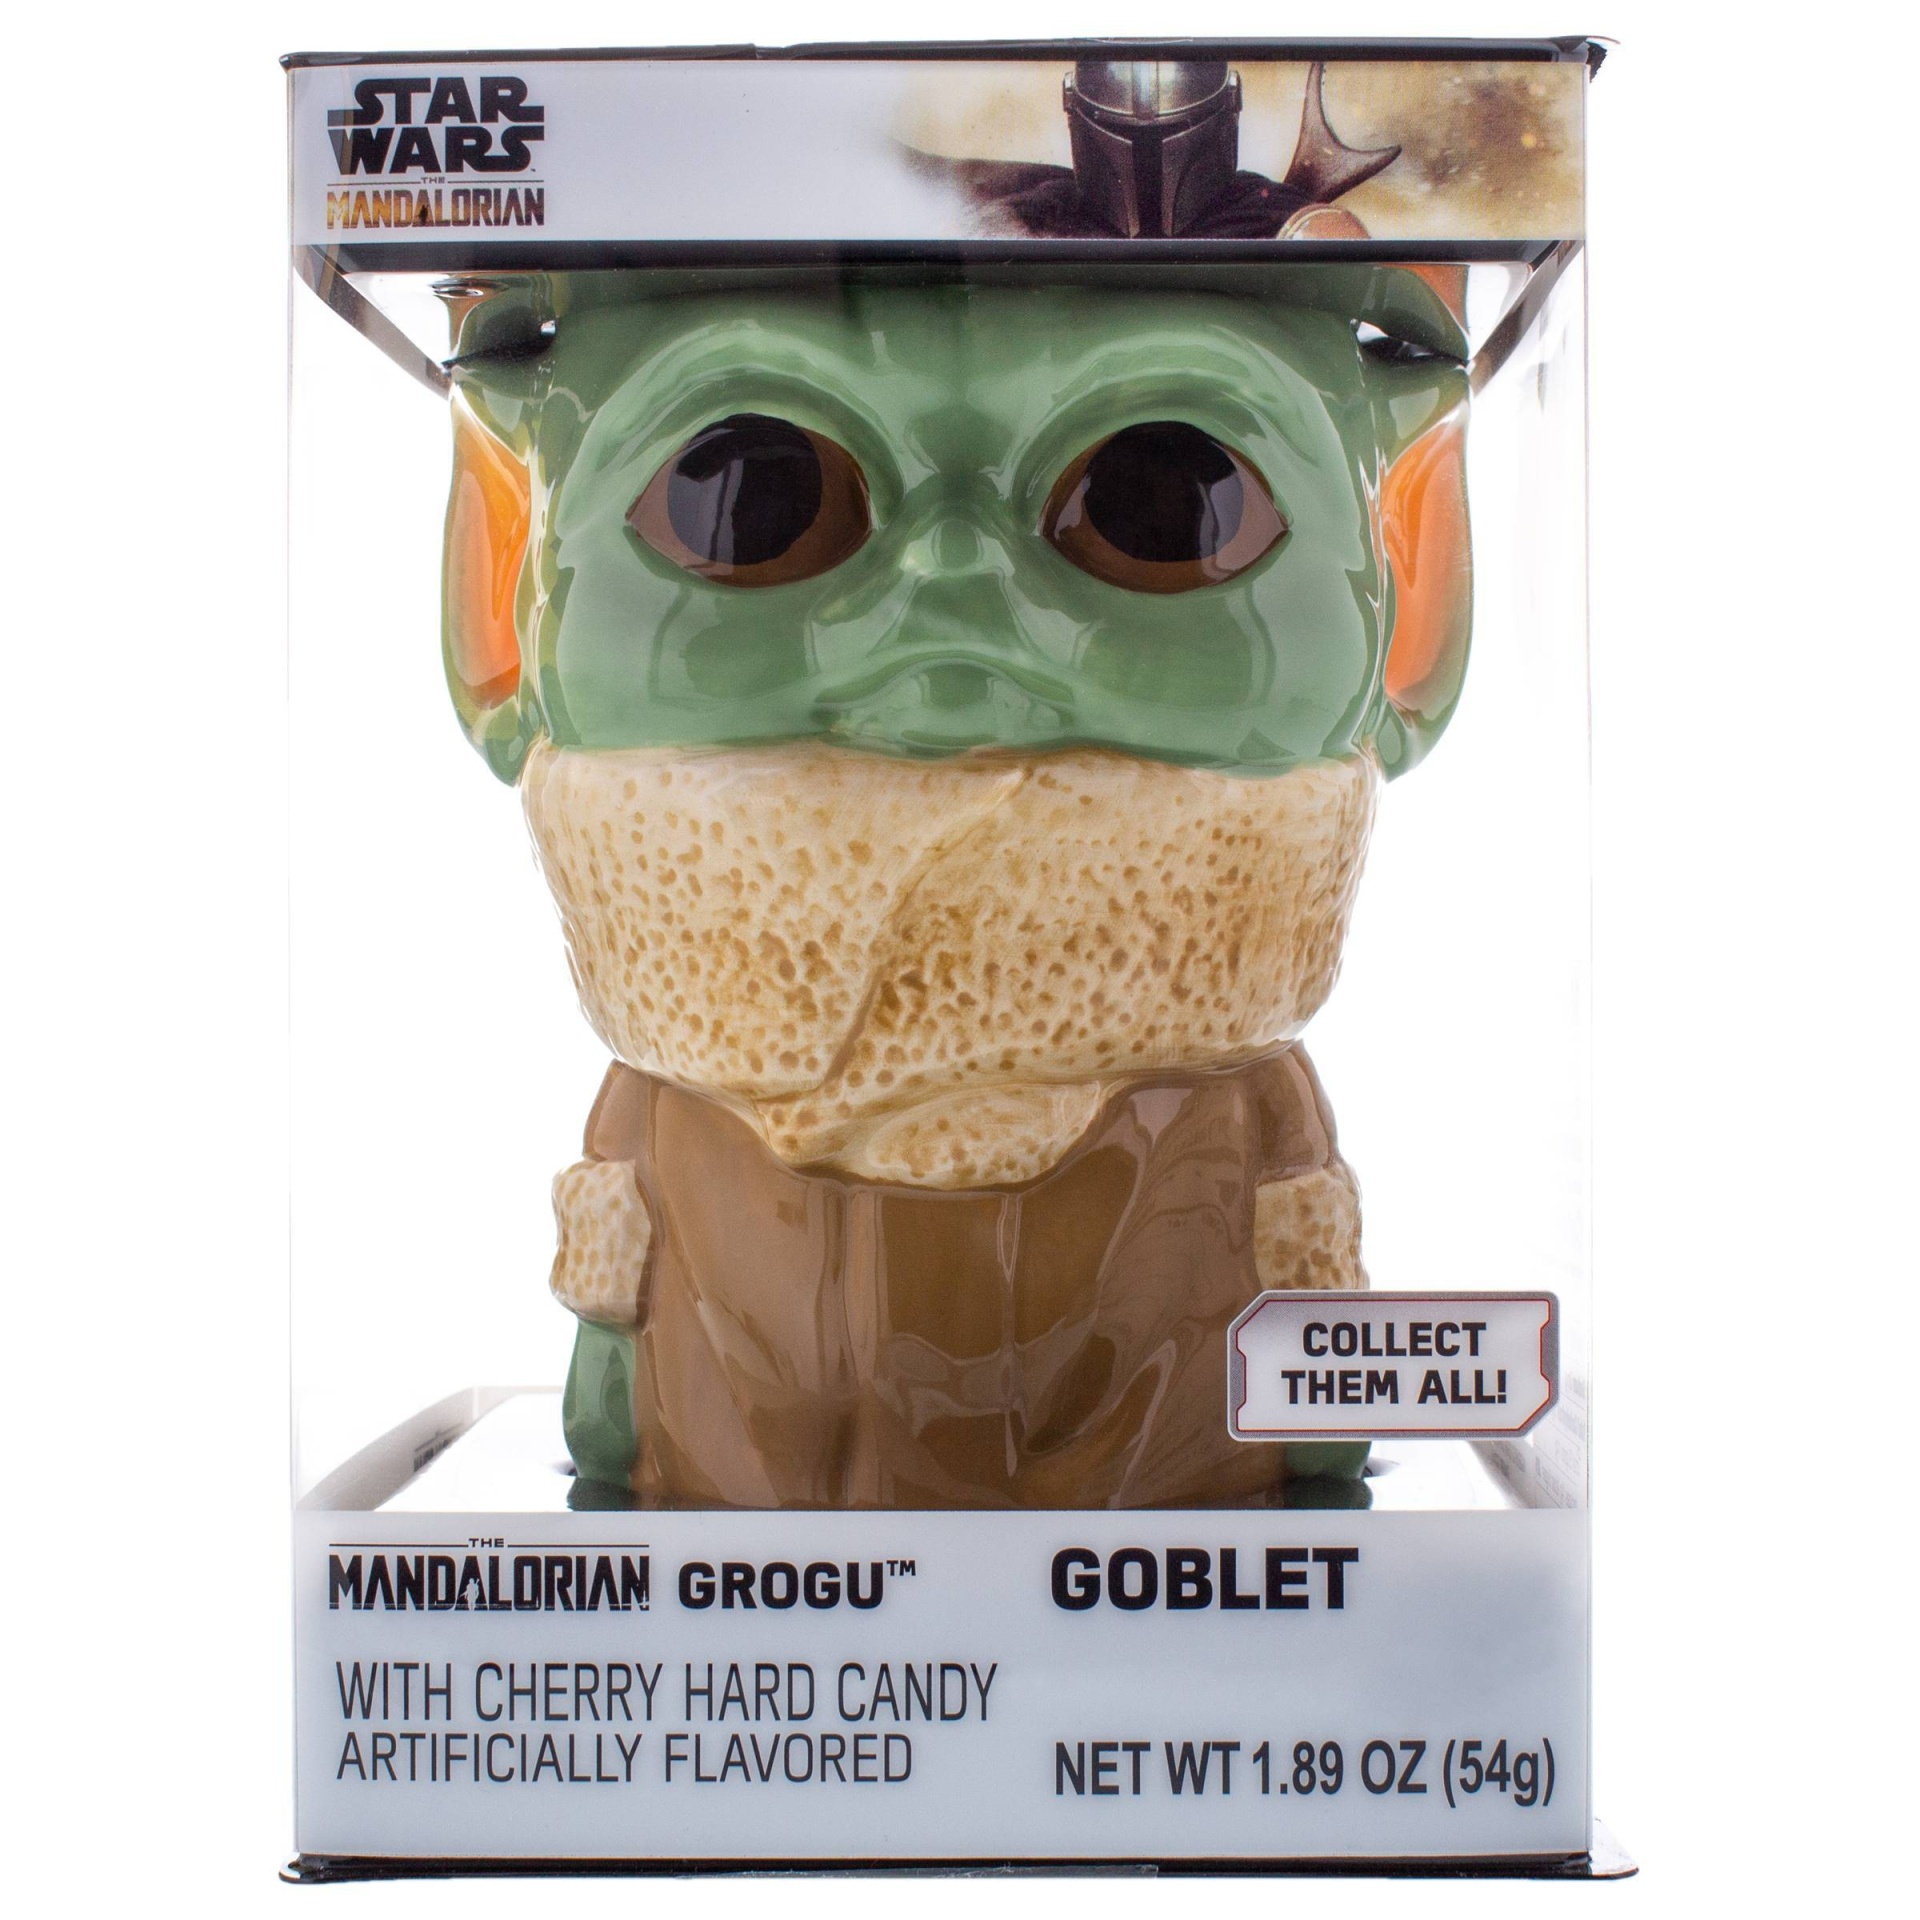 Star Wars Yoda Goblet With Conversation Heart - Eat The Candy Force! 